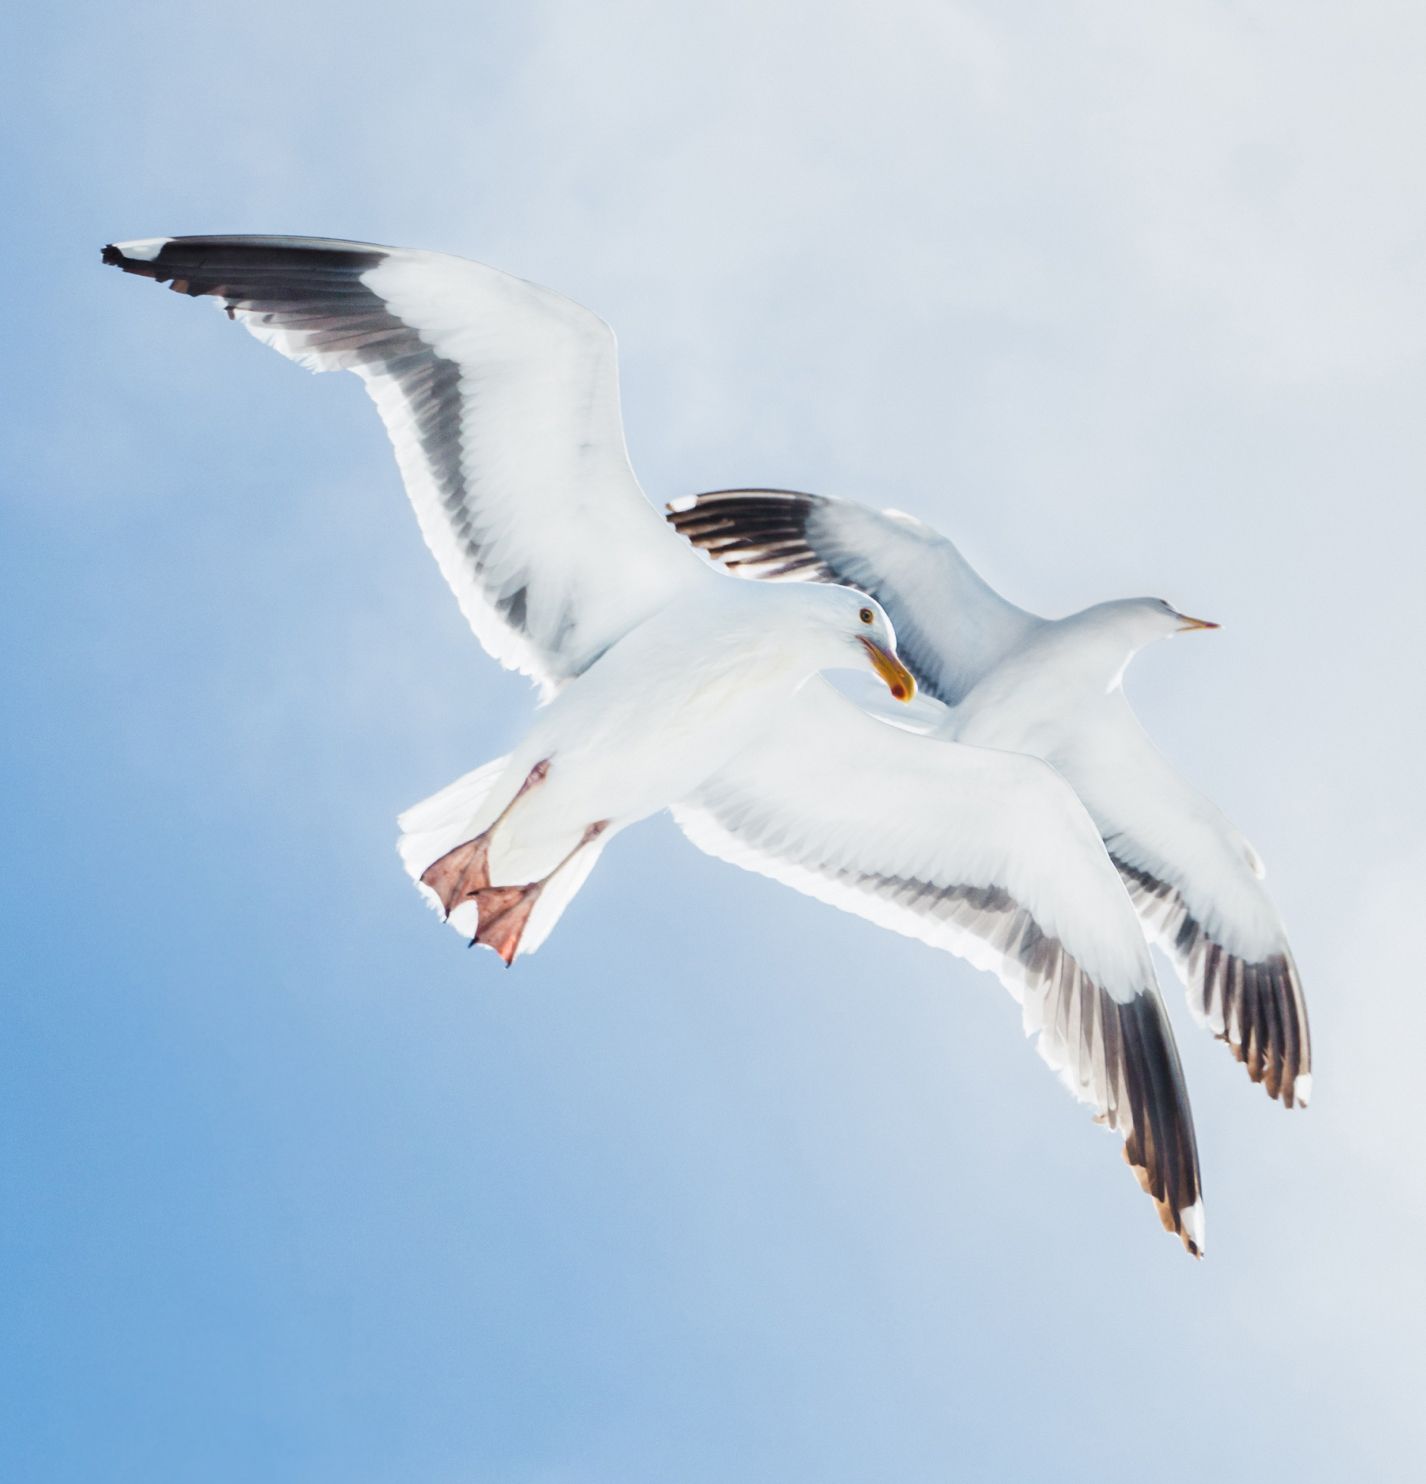 Two seagulls flying